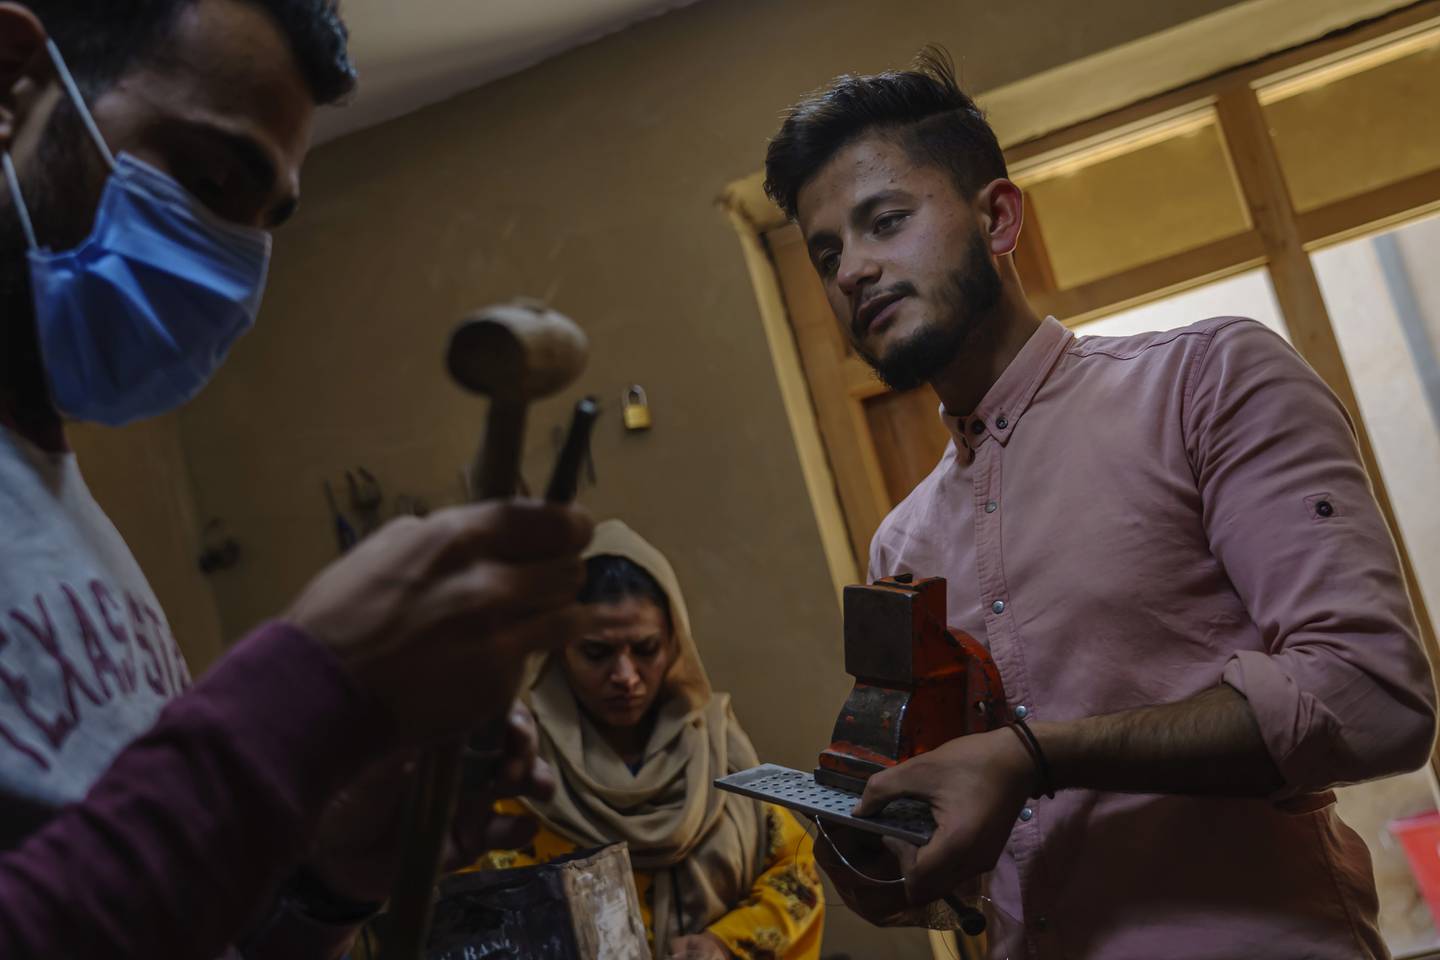 Born into occupation, young Afghans fear the Taliban will crush their freedoms when U.S. troops exit